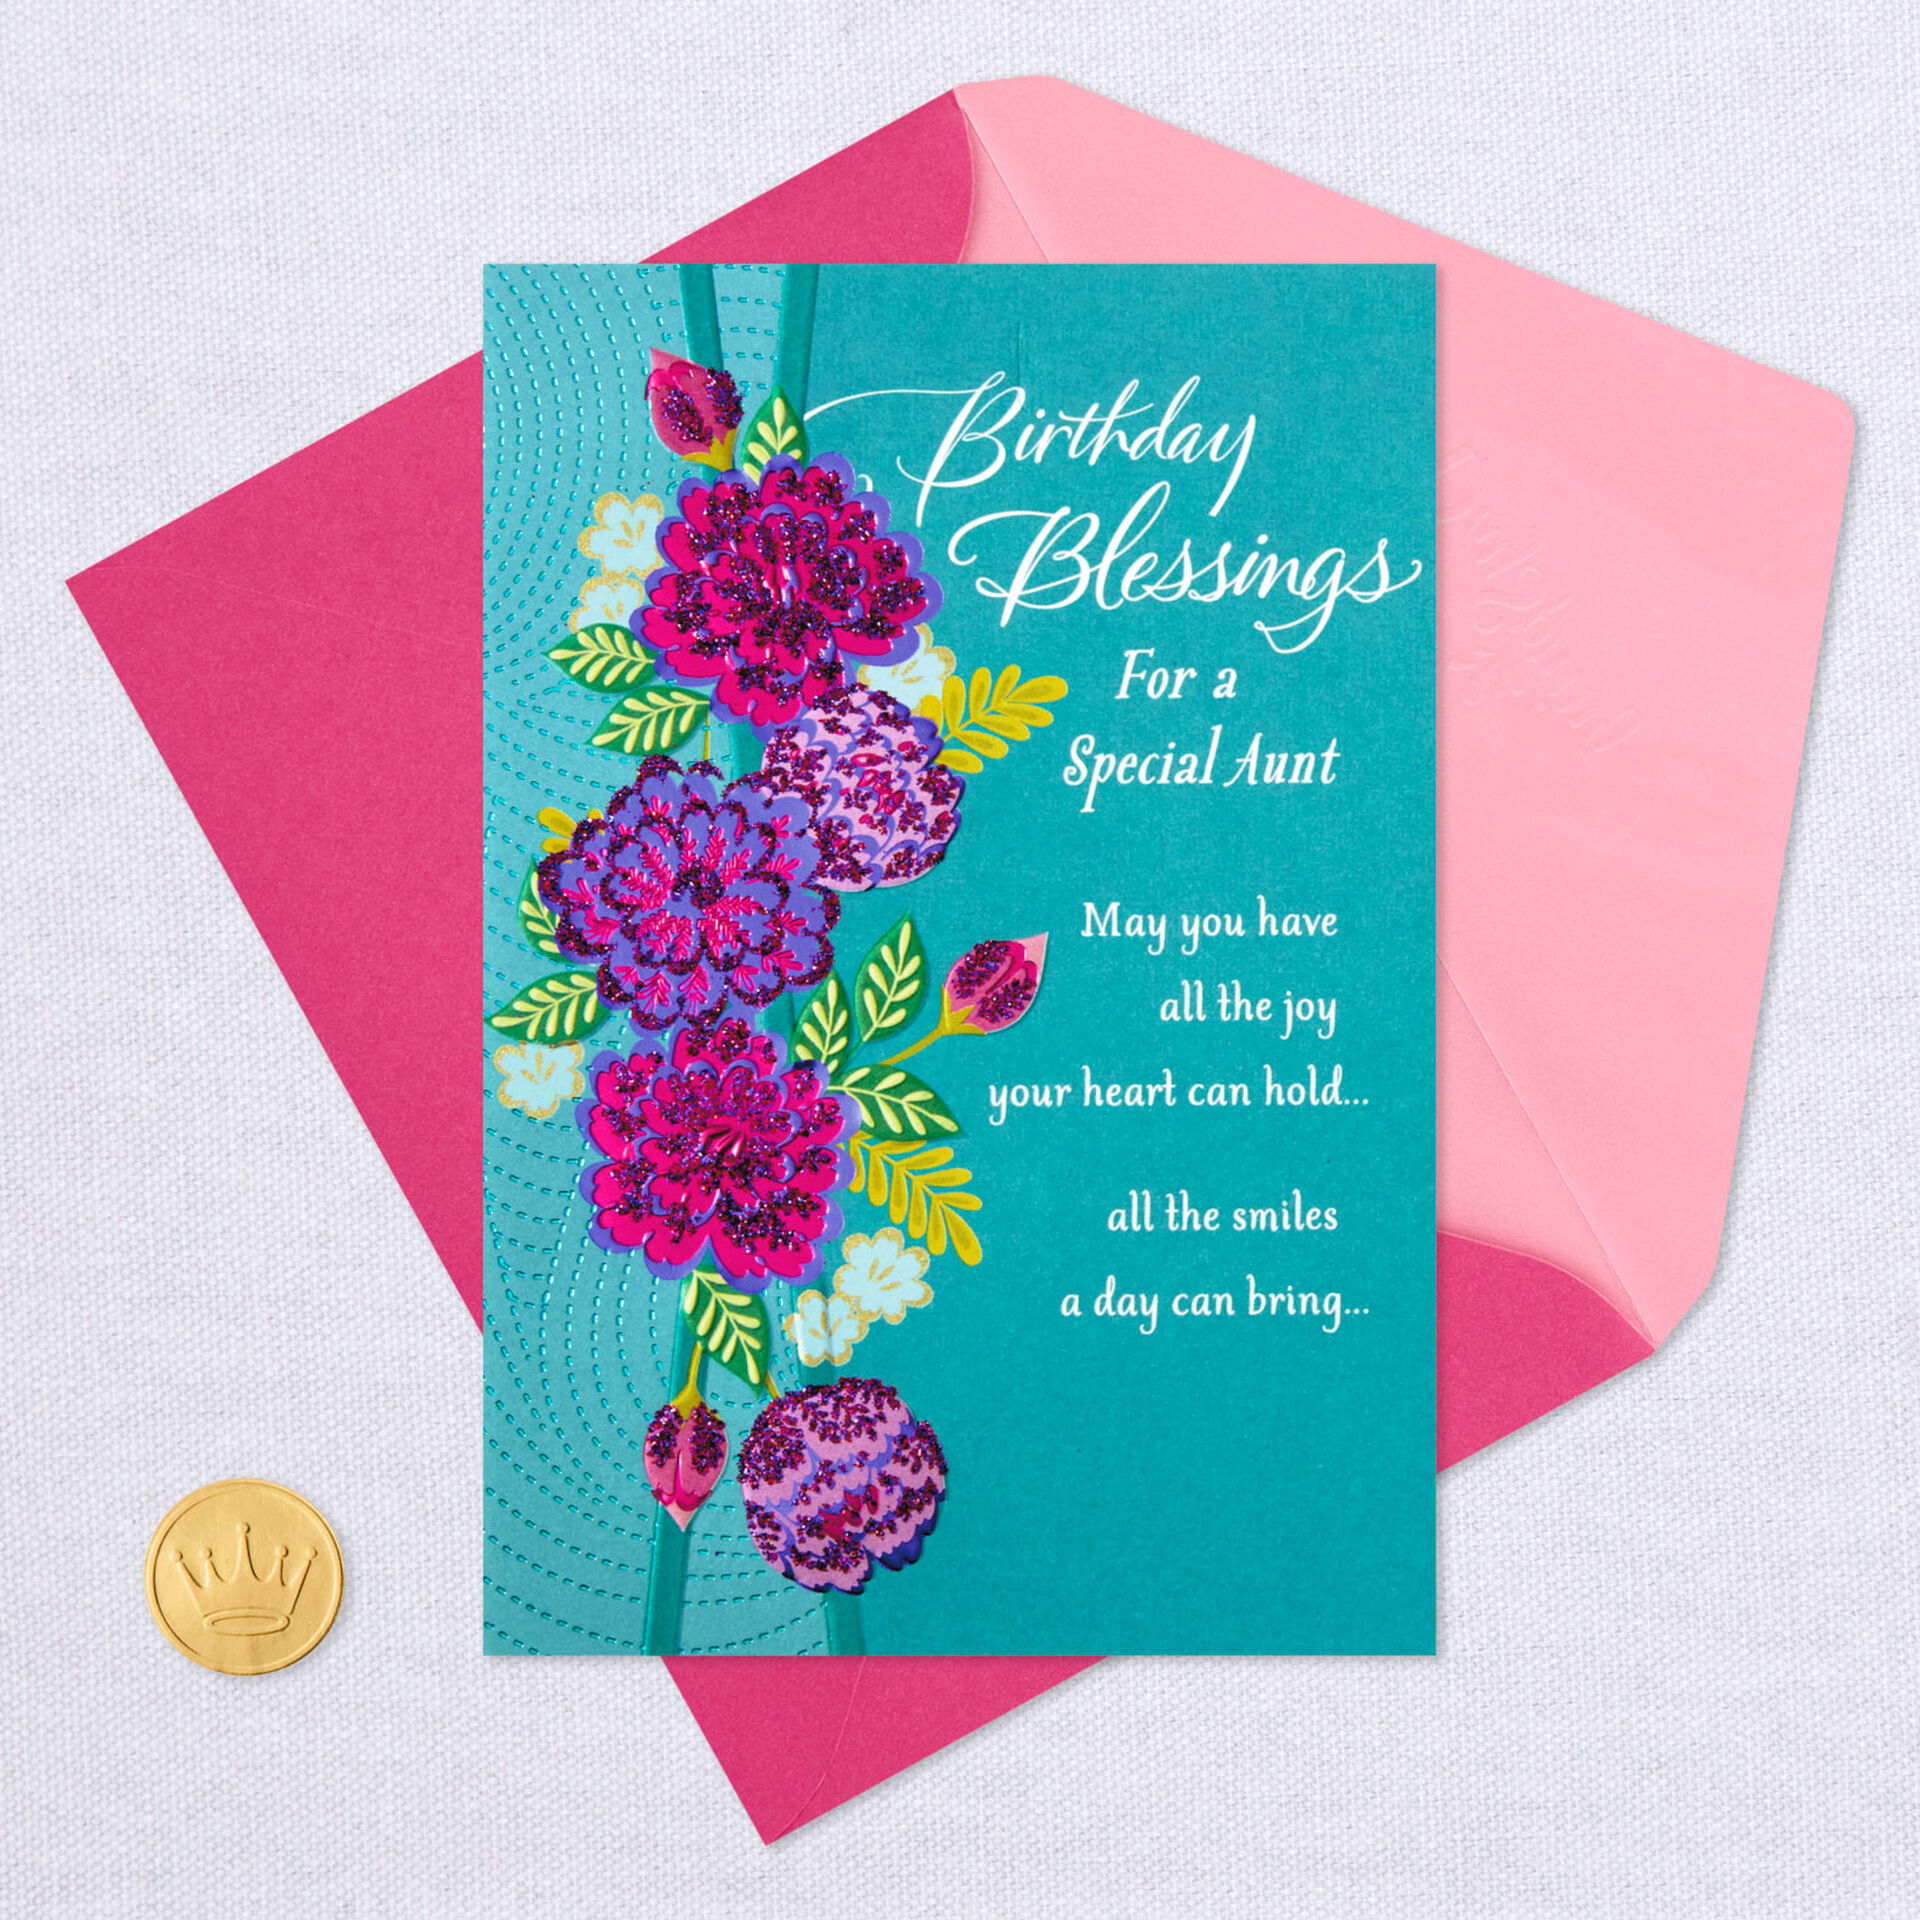 All The Joy Your Heart Can Hold Religious Birthday Card For Aunt